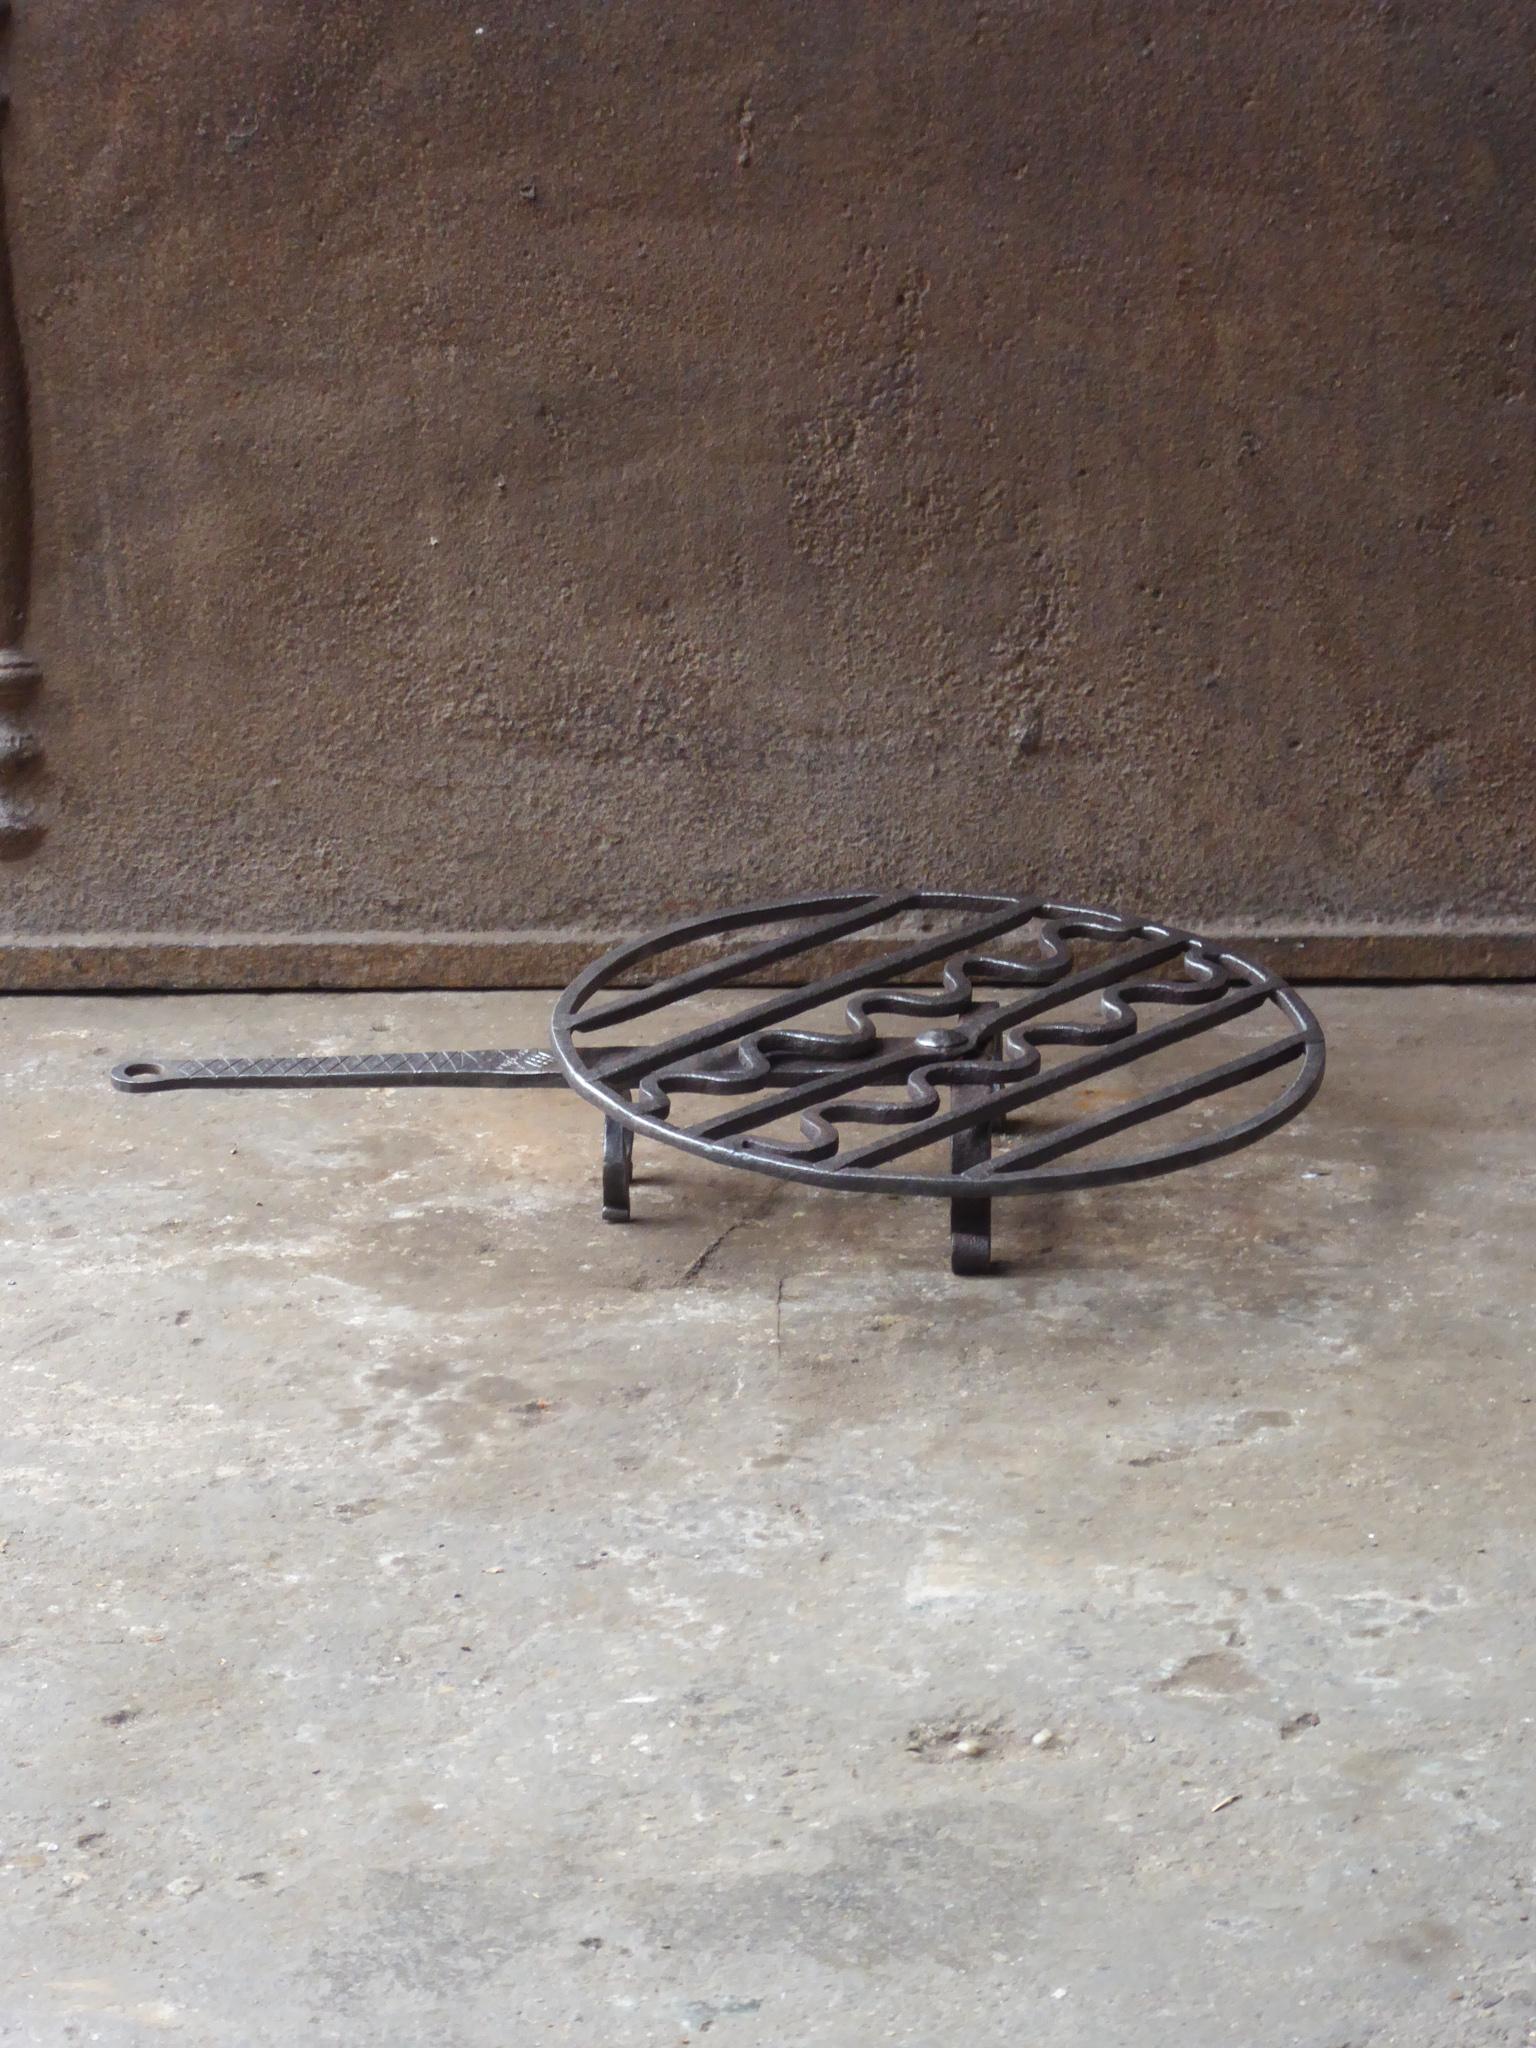 17th-18th Century French rotating gridiron made of decorated wrought iron. To prepare small pieces of meat quickly over the fire. Sometimes they were put in the fire or else on a trivet, depending on the size of the fire. The gridiron is in a good